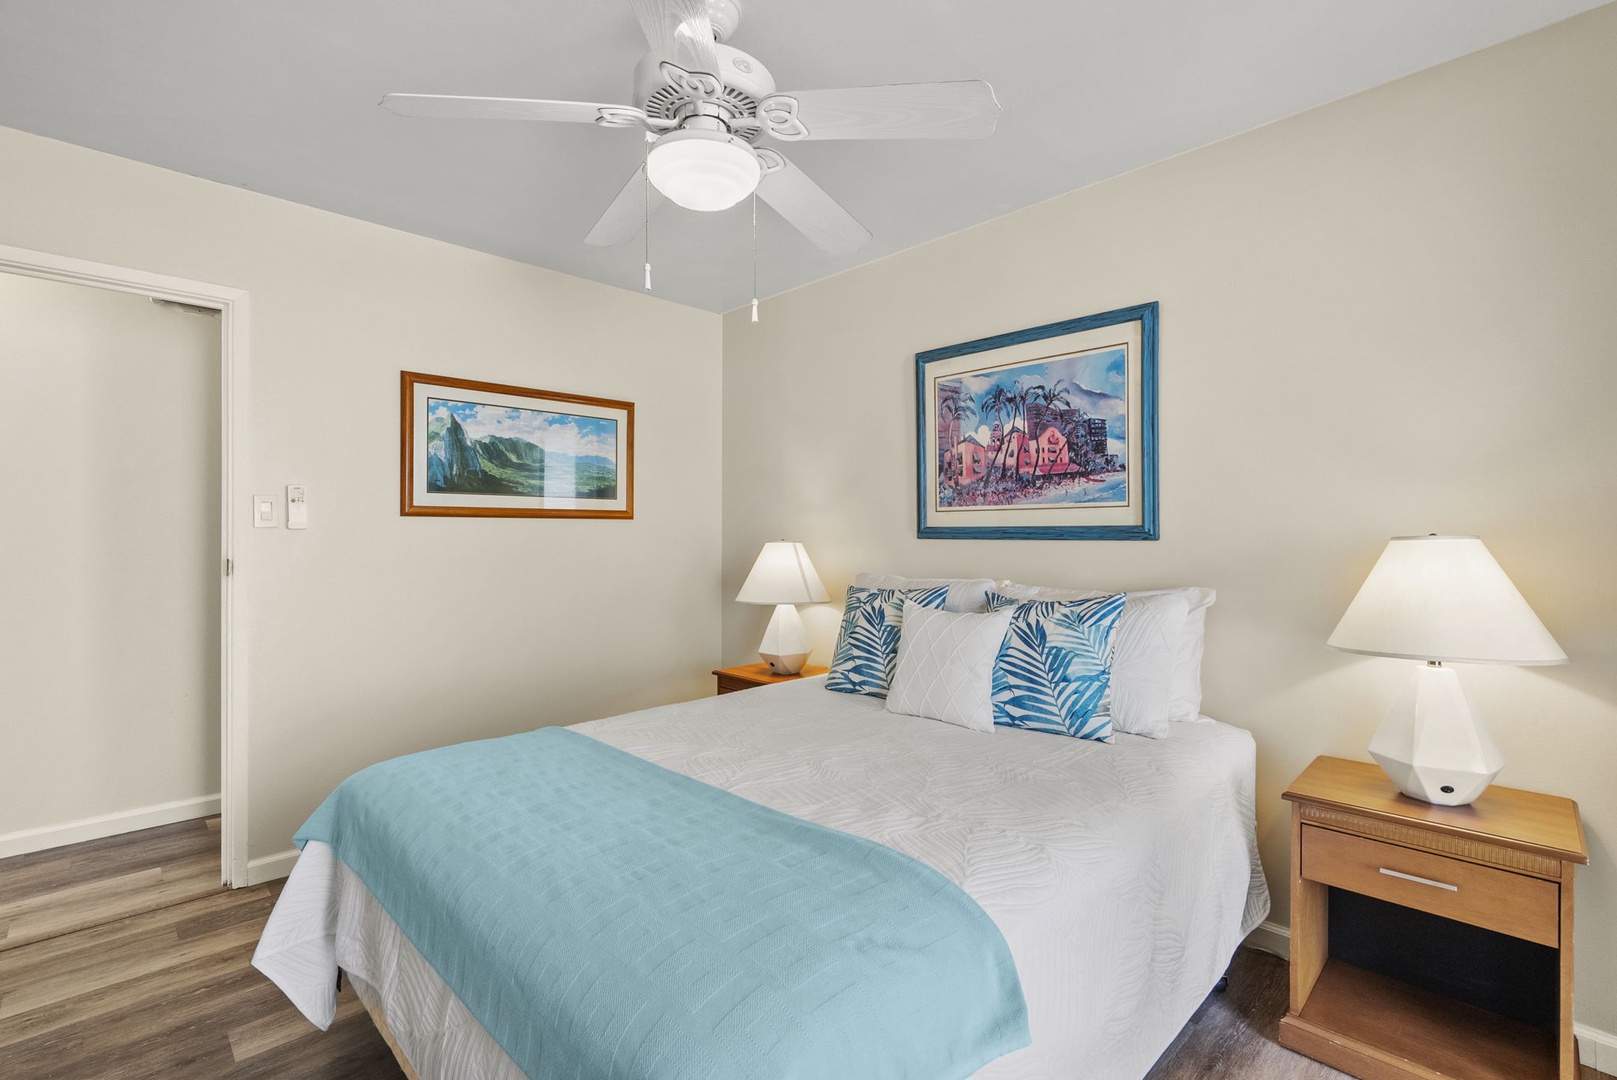 Kailua Vacation Rentals, Hale Aloha - "Guest suite offering a serene retreat with premium linens and a plush queen bed.